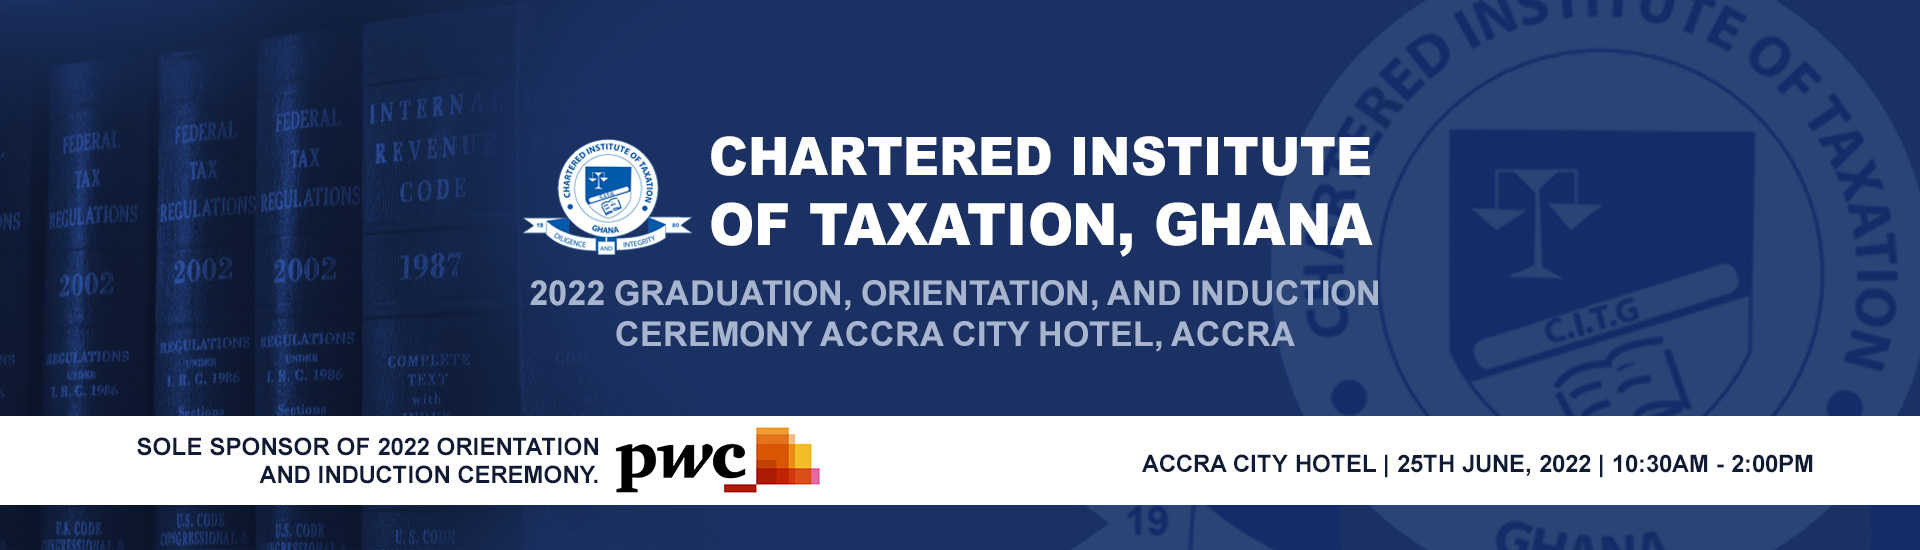 2022 Graduation, Orientation, and Induction Ceremony Accra City Hotel, Accra